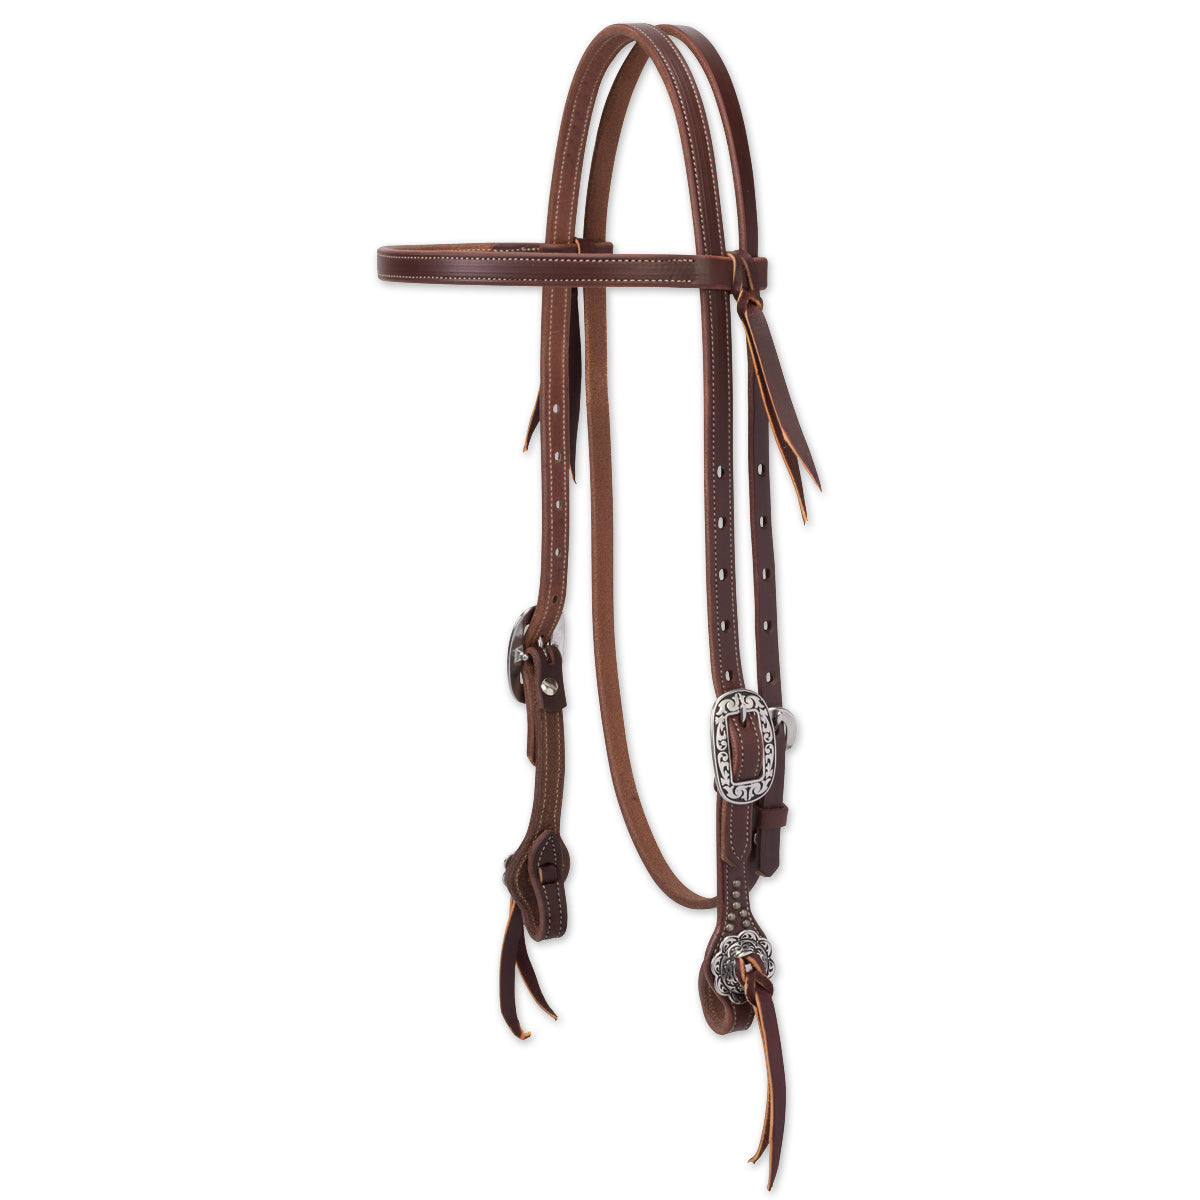 Weaver Leather Working Tack Straight Browband Headstall with Floral Hardware, Average